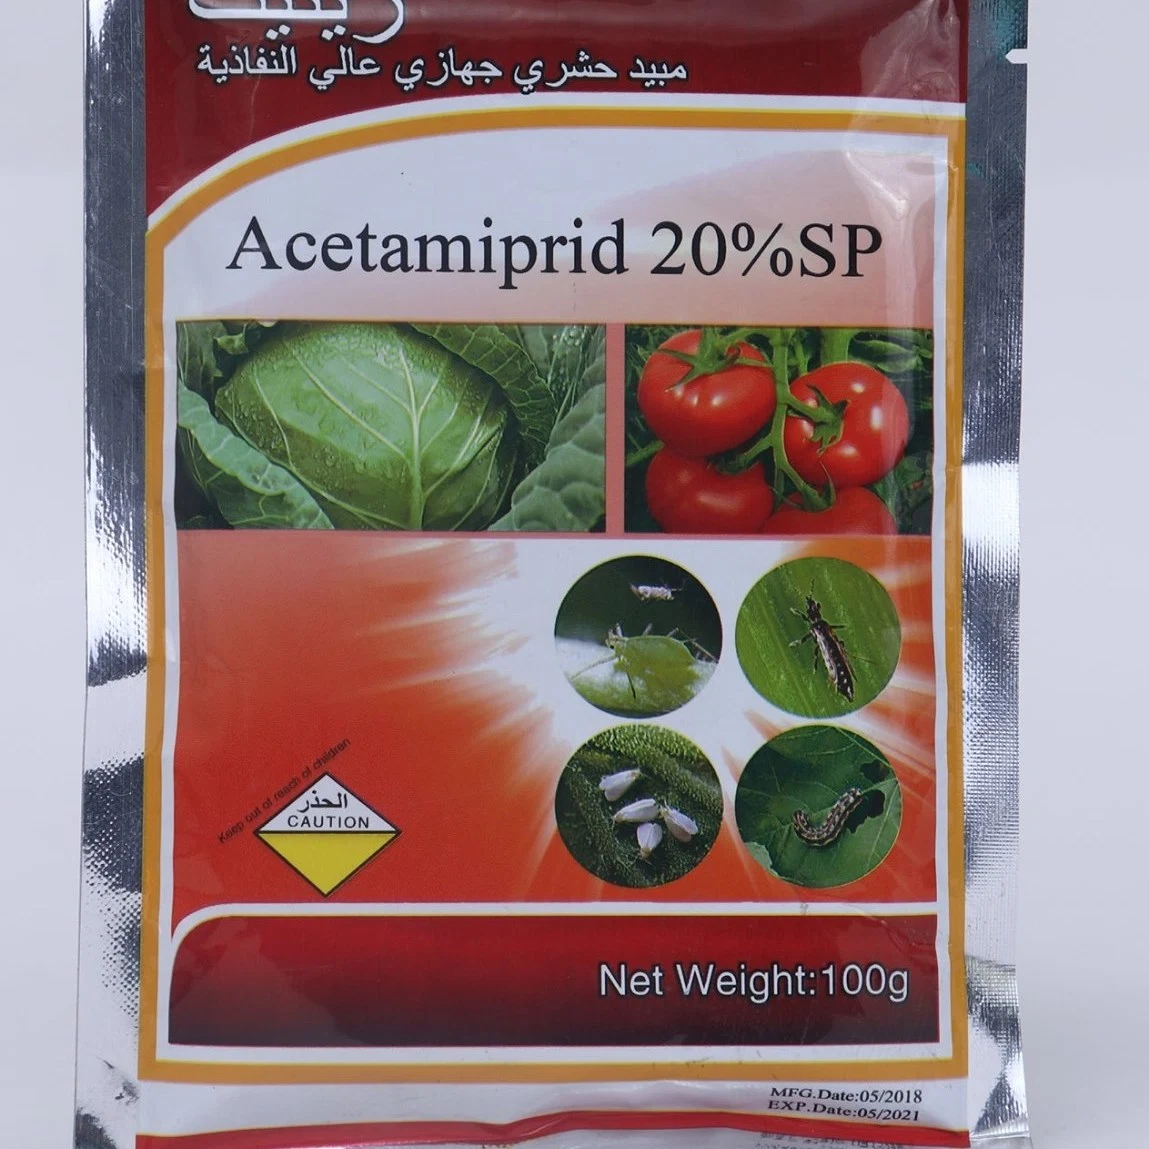 Tangyun Fast Delivery Acetamiprid 20 Sp with Customized Label Best Price